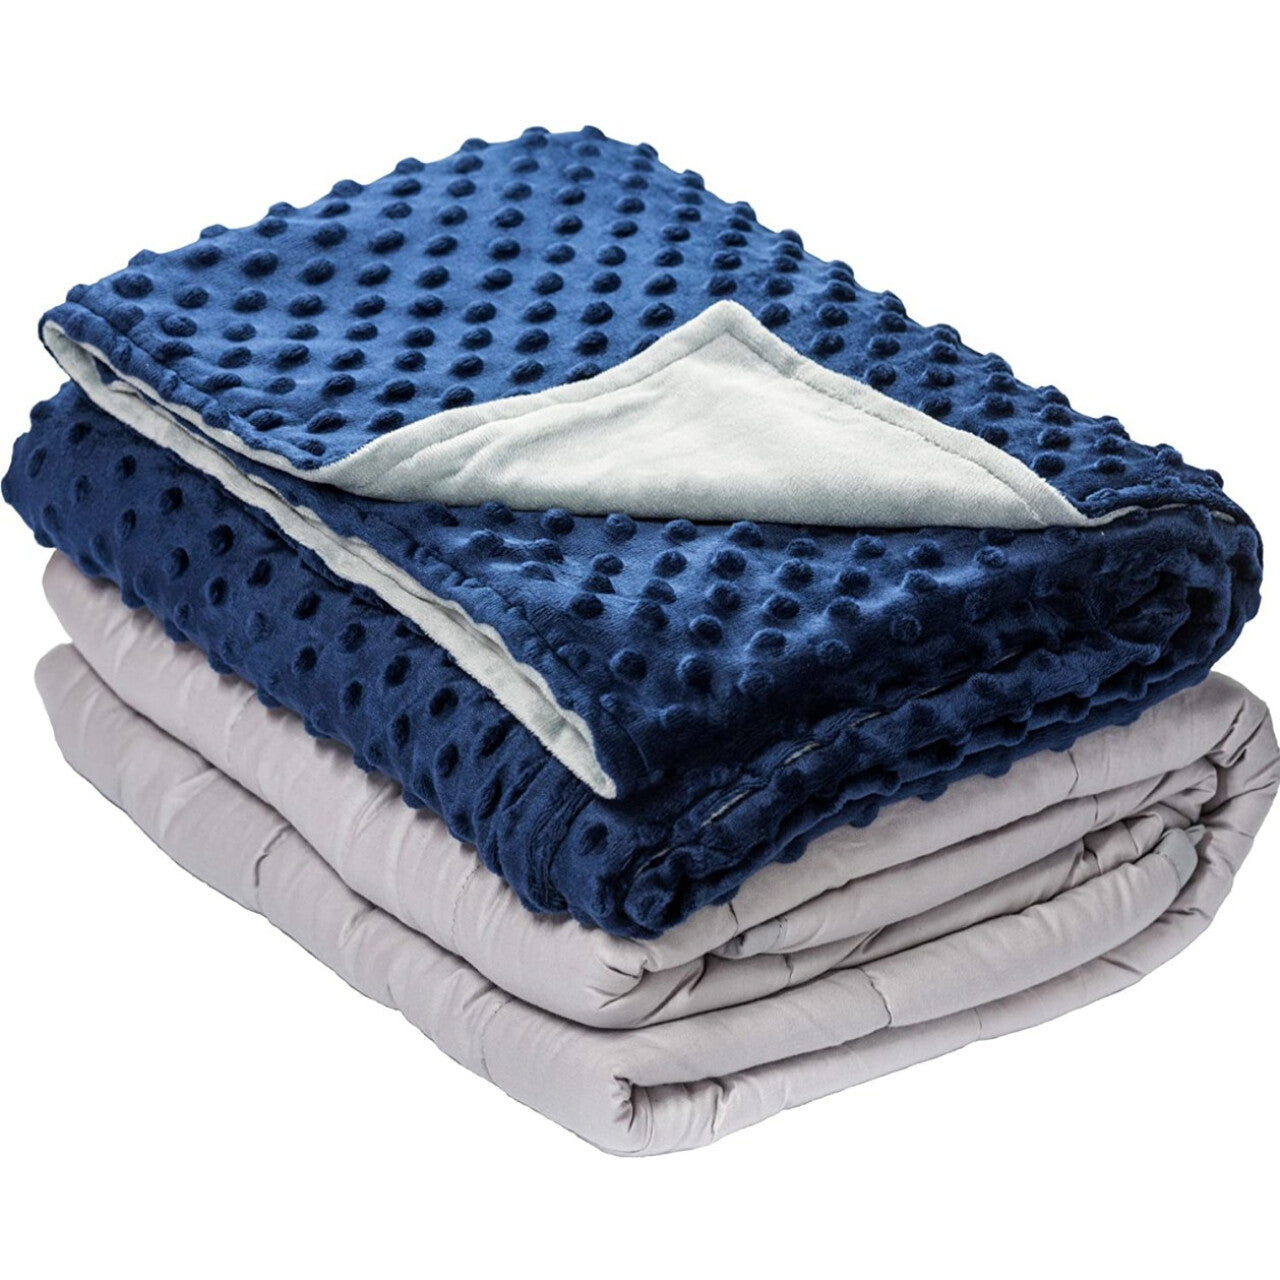 12lb Weighted Blanket